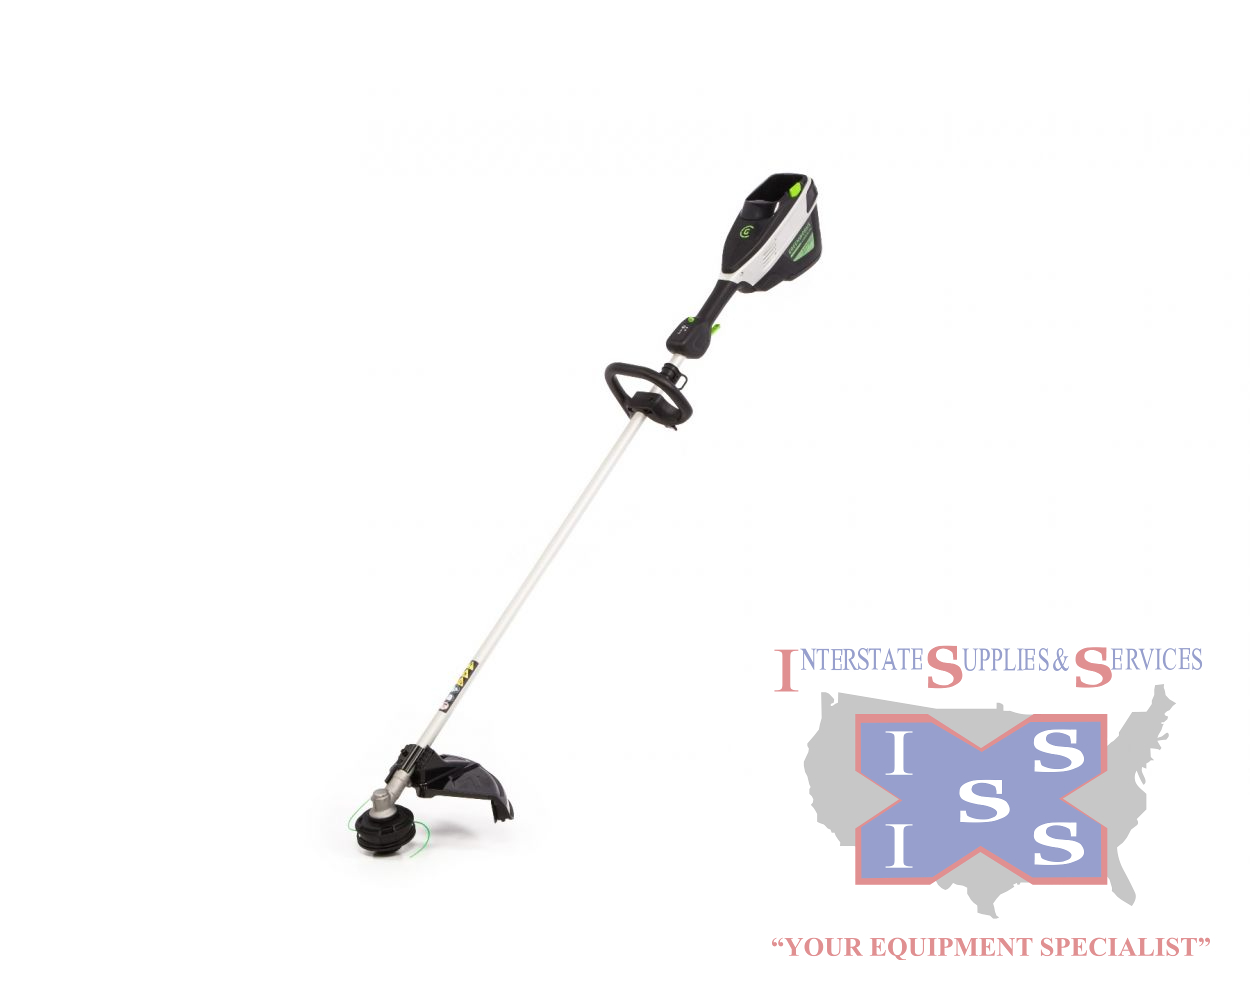 82T161 82-Volt 16" String Trimmer (Tool Only)